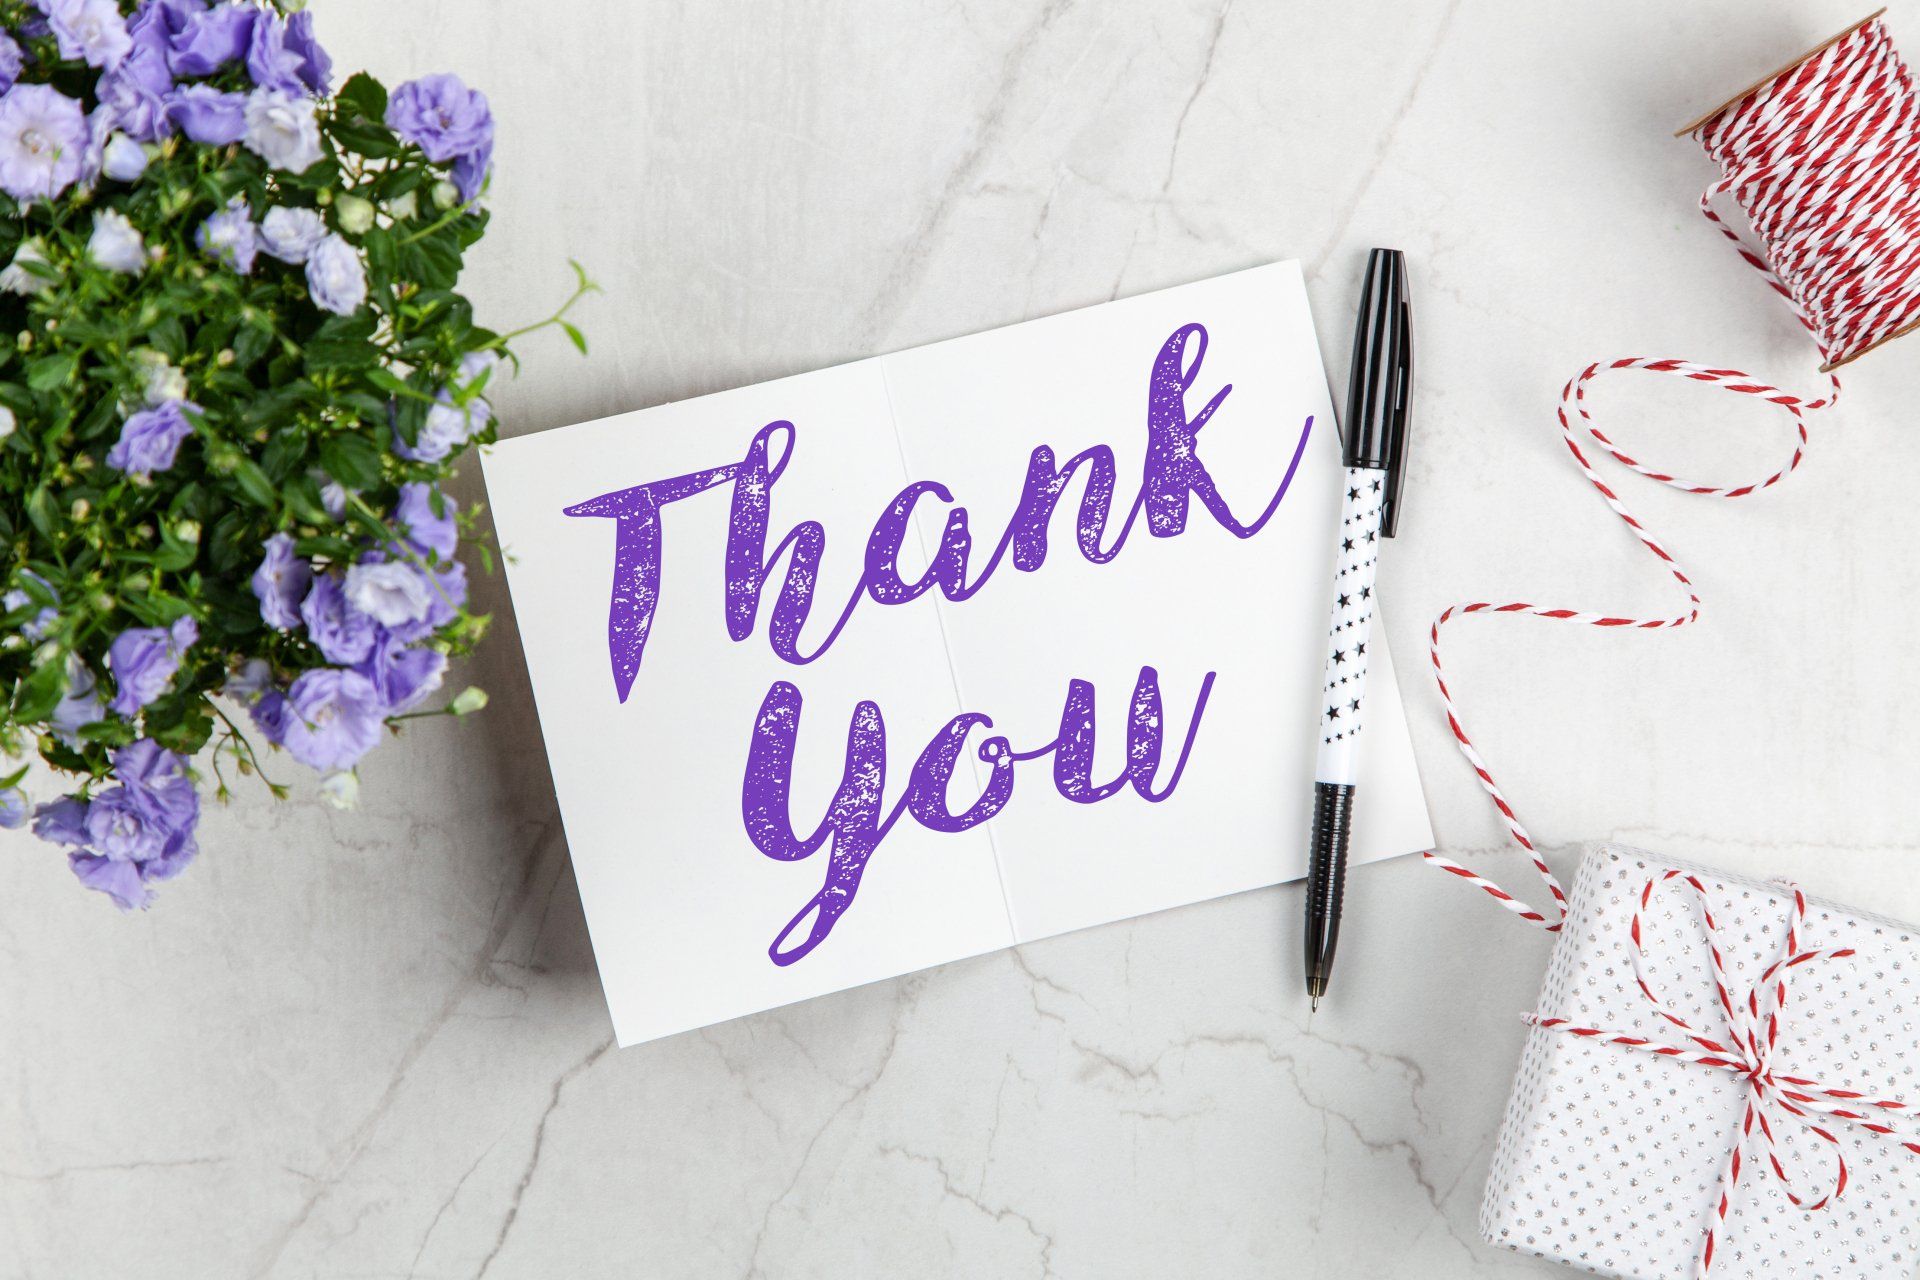 The words Thank You written in purple on a small note card.